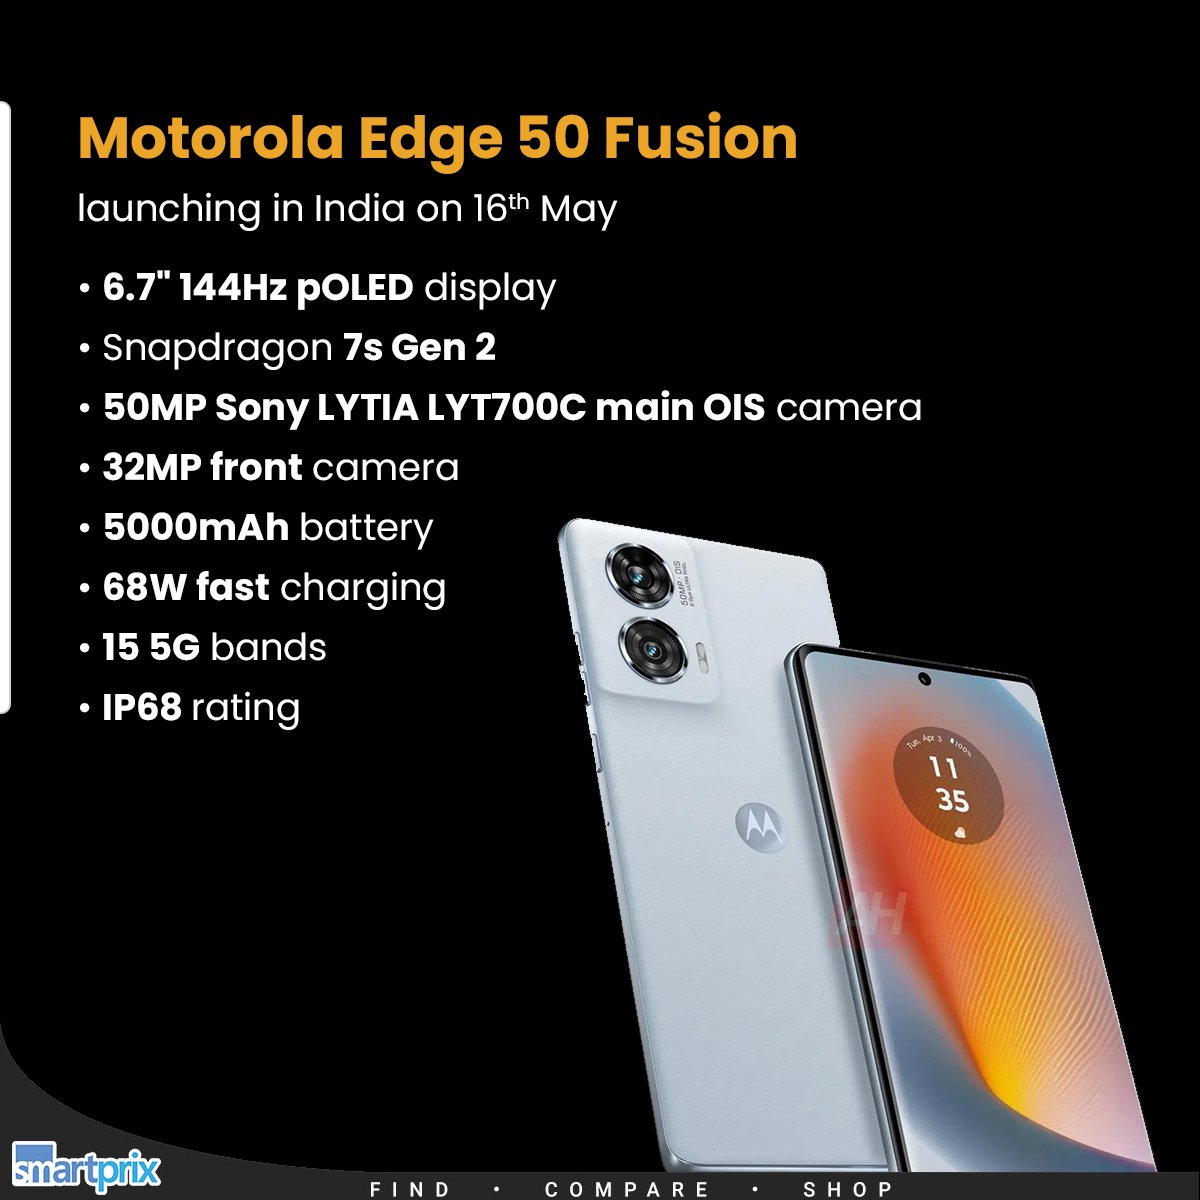 Motorola Edge 50 Fusion launch date officially confirmed #Motorola #MotorolaEdge50Fusion #Upcoming